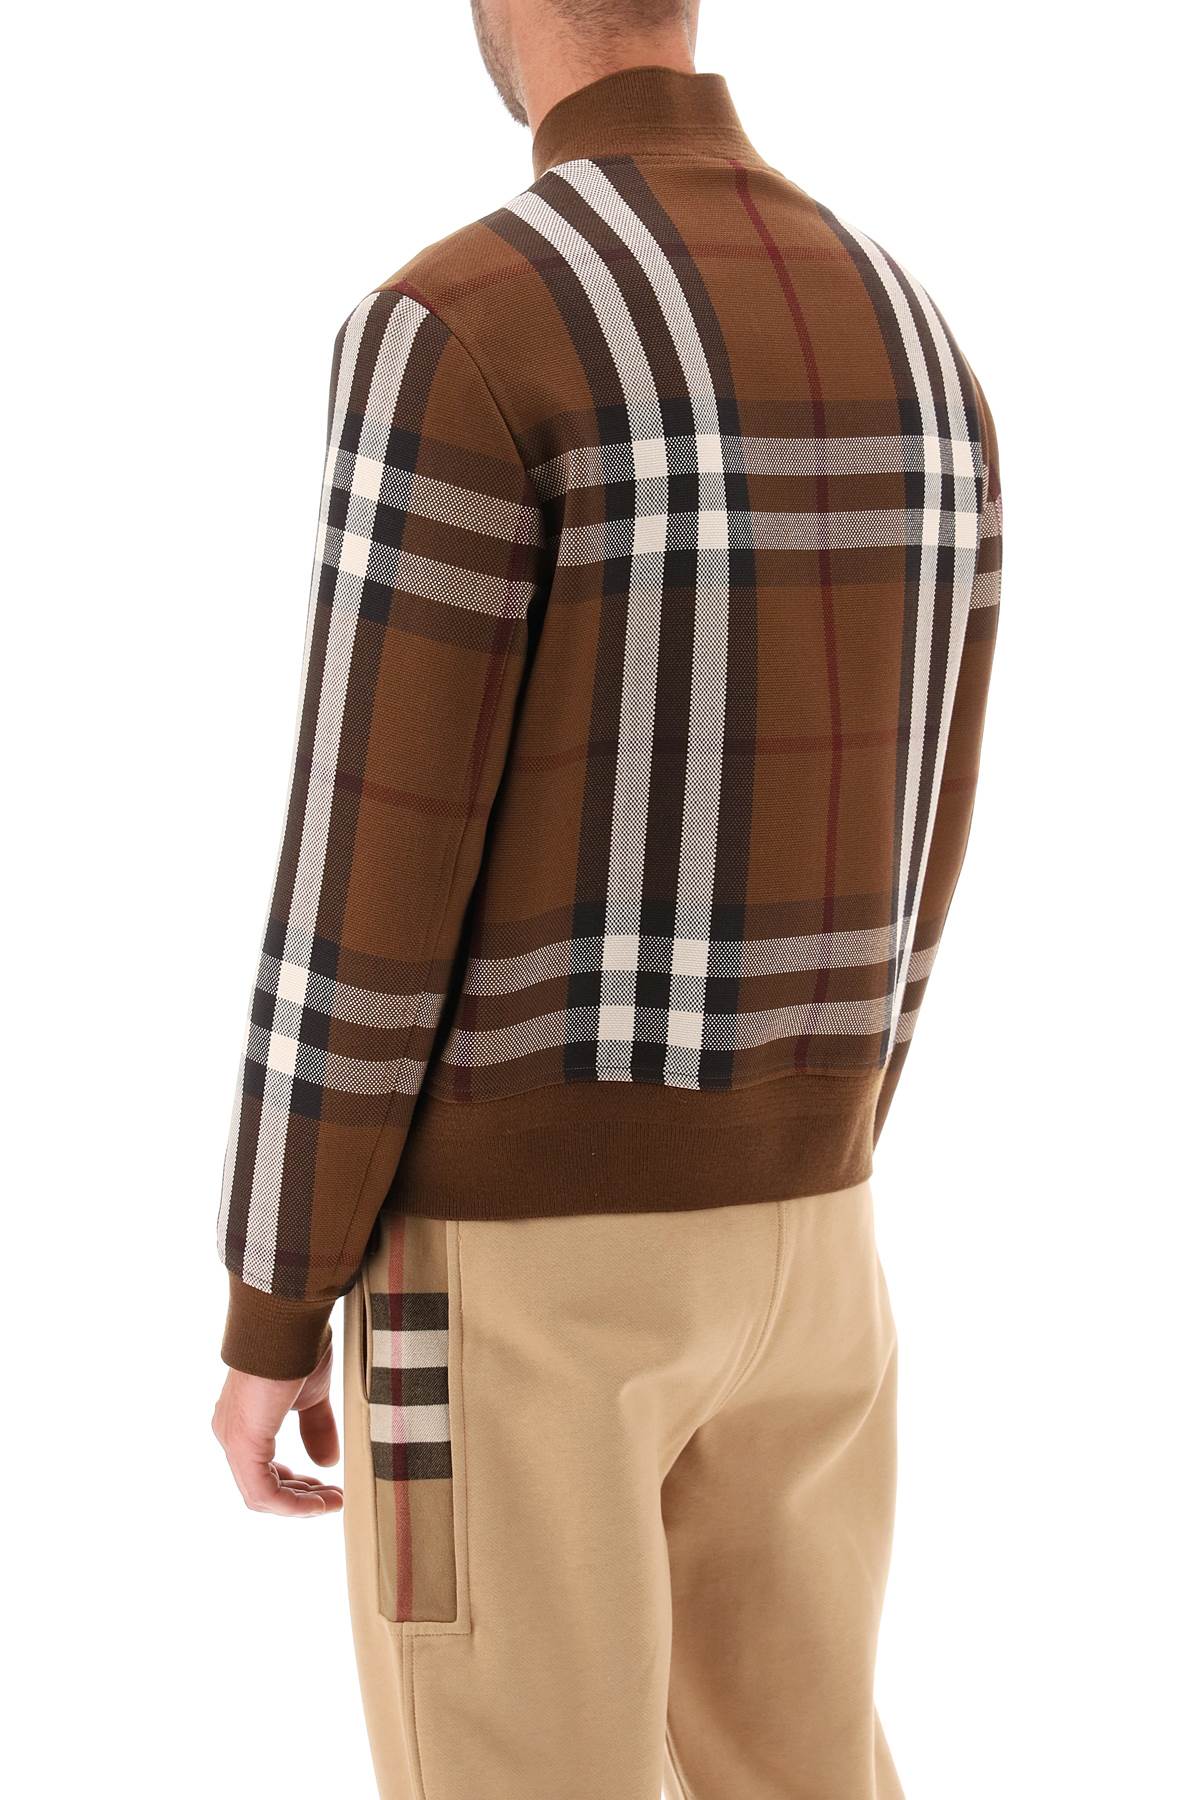 Classic Bomber Jacket with Burberry Check Motif for Men